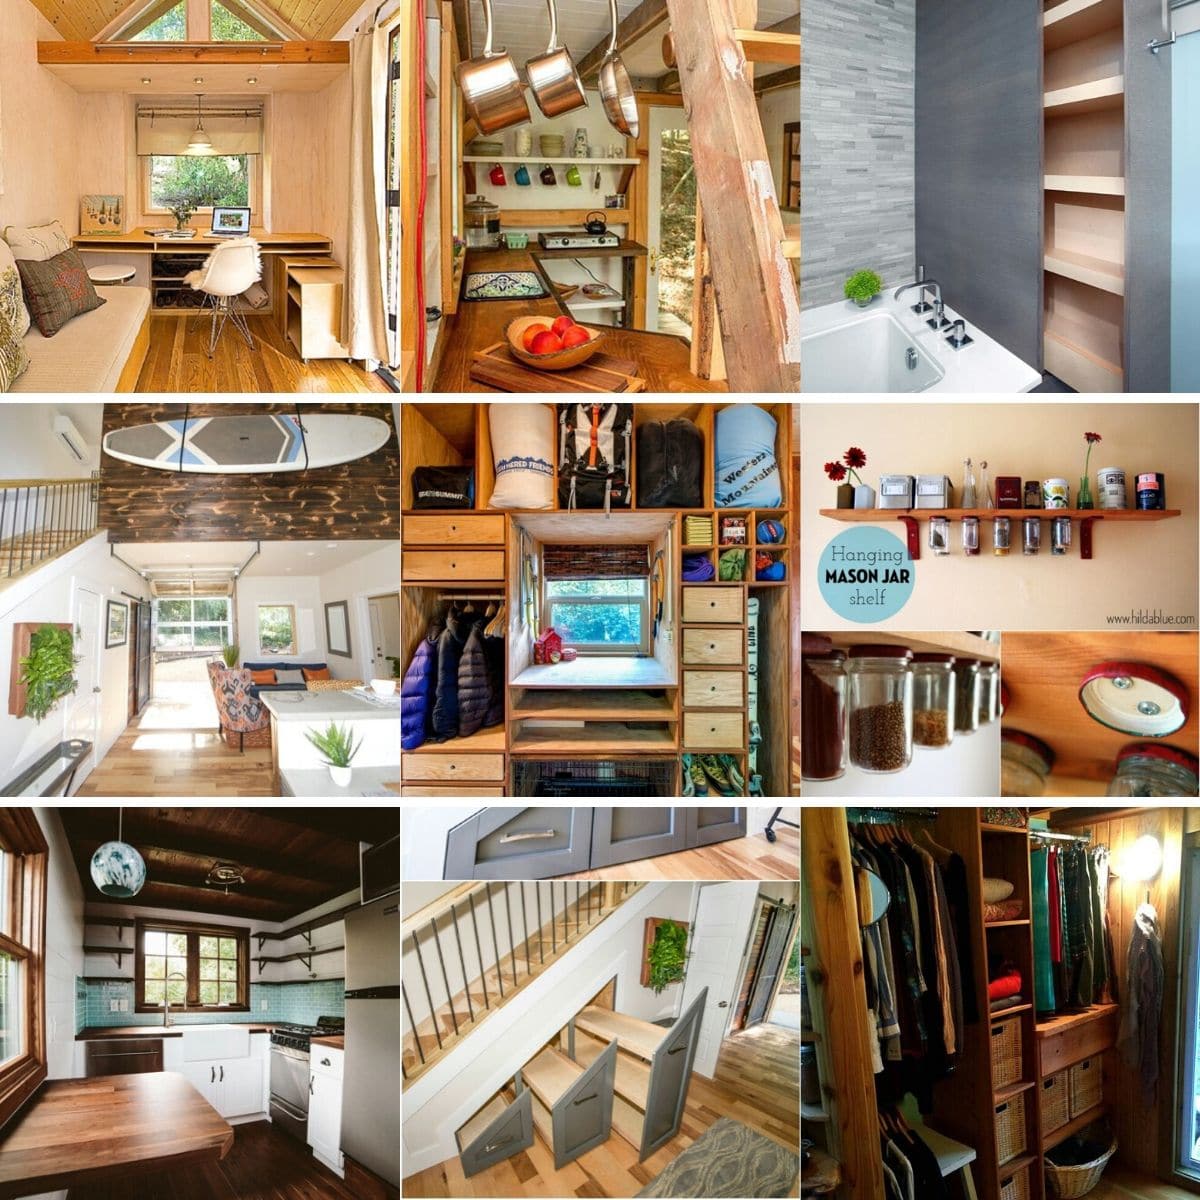 https://www.itinyhouses.com/wp-content/uploads/2016/12/tiny-house-organizing-featured.jpg